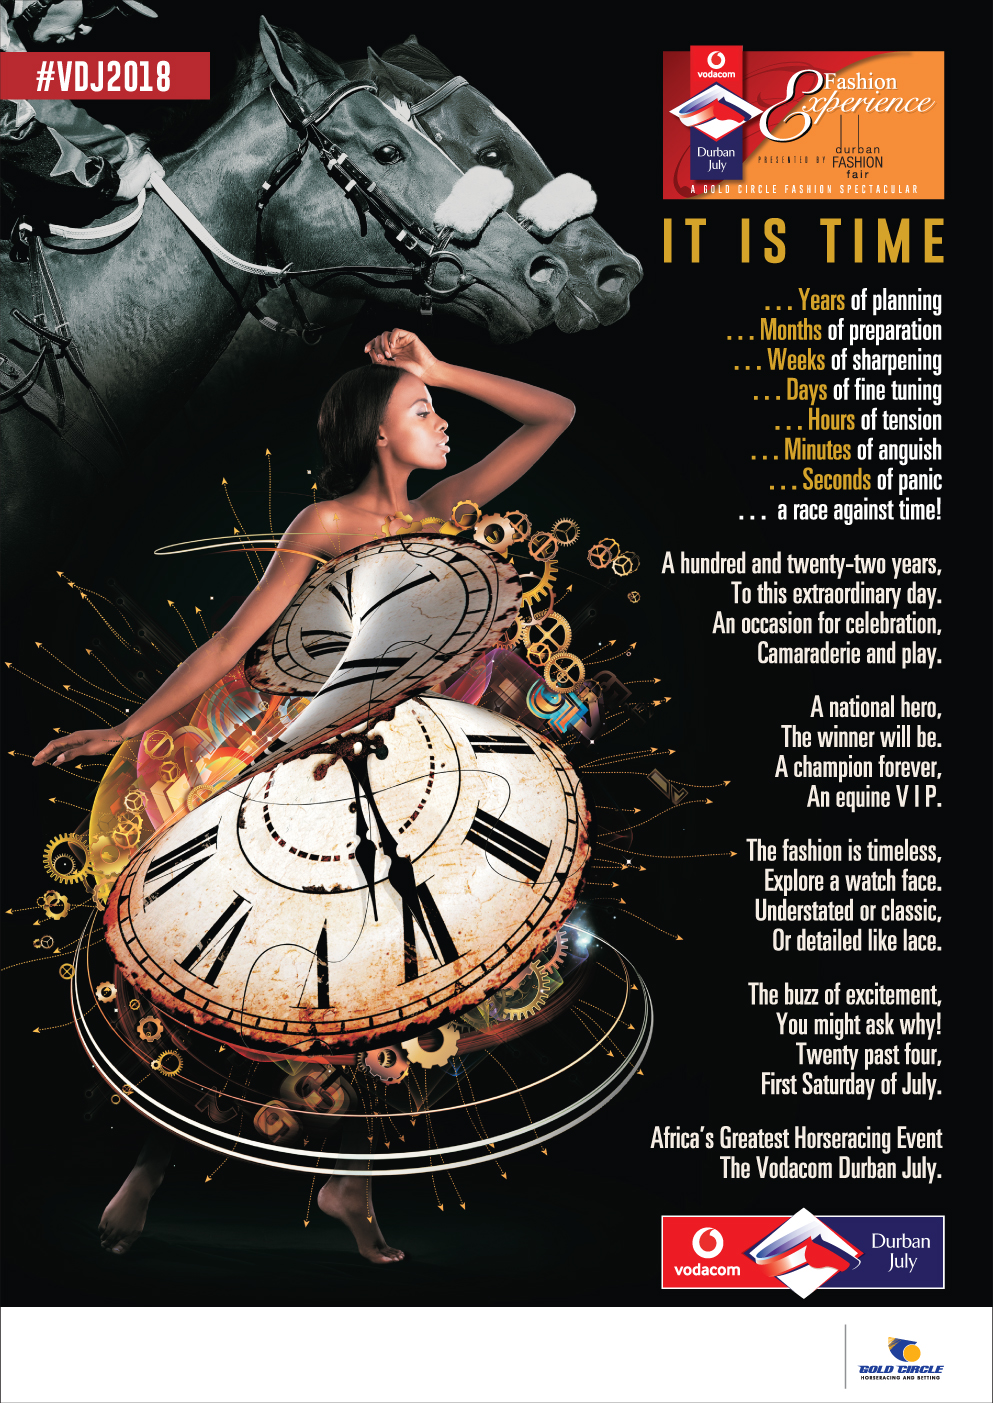 Vodacom Durban July Theme Announced: “It Is Time”